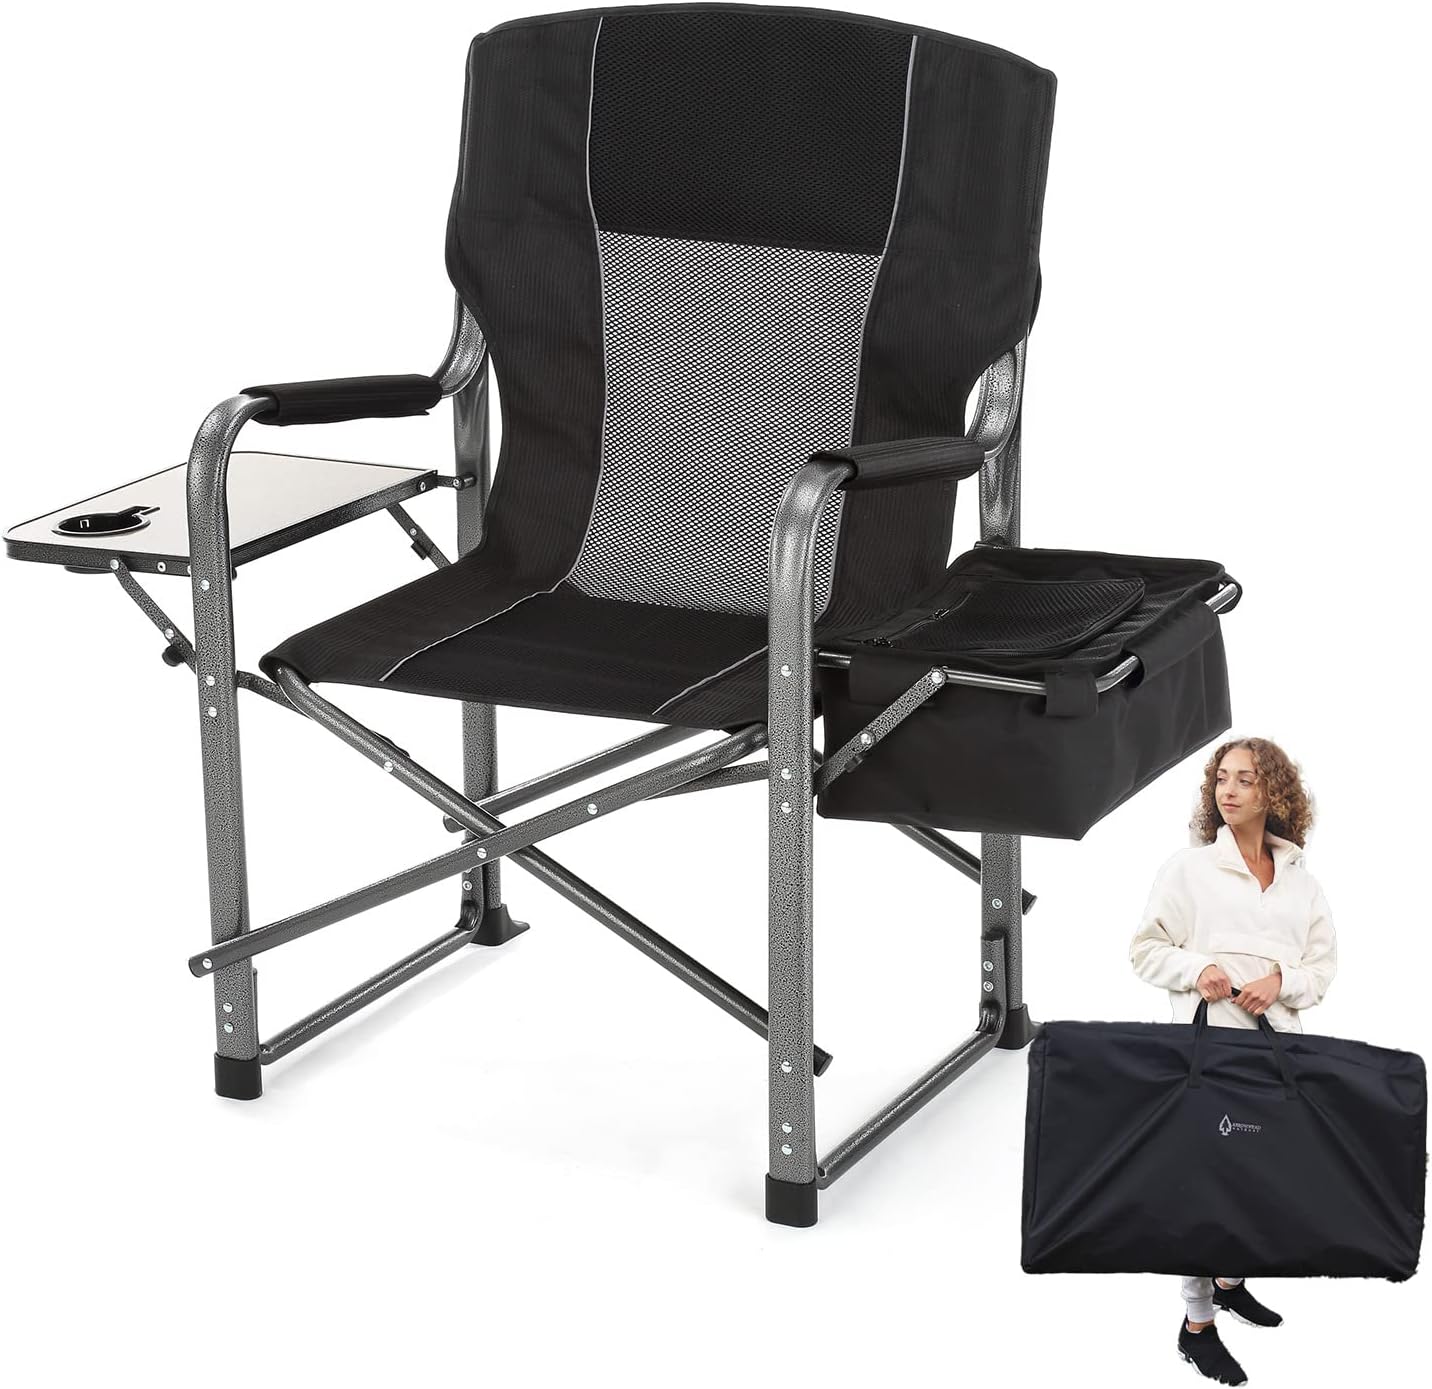 Folding Director’s Chair w/Side Table & Integrated Cooler, Cup Holder, Storage Pouch